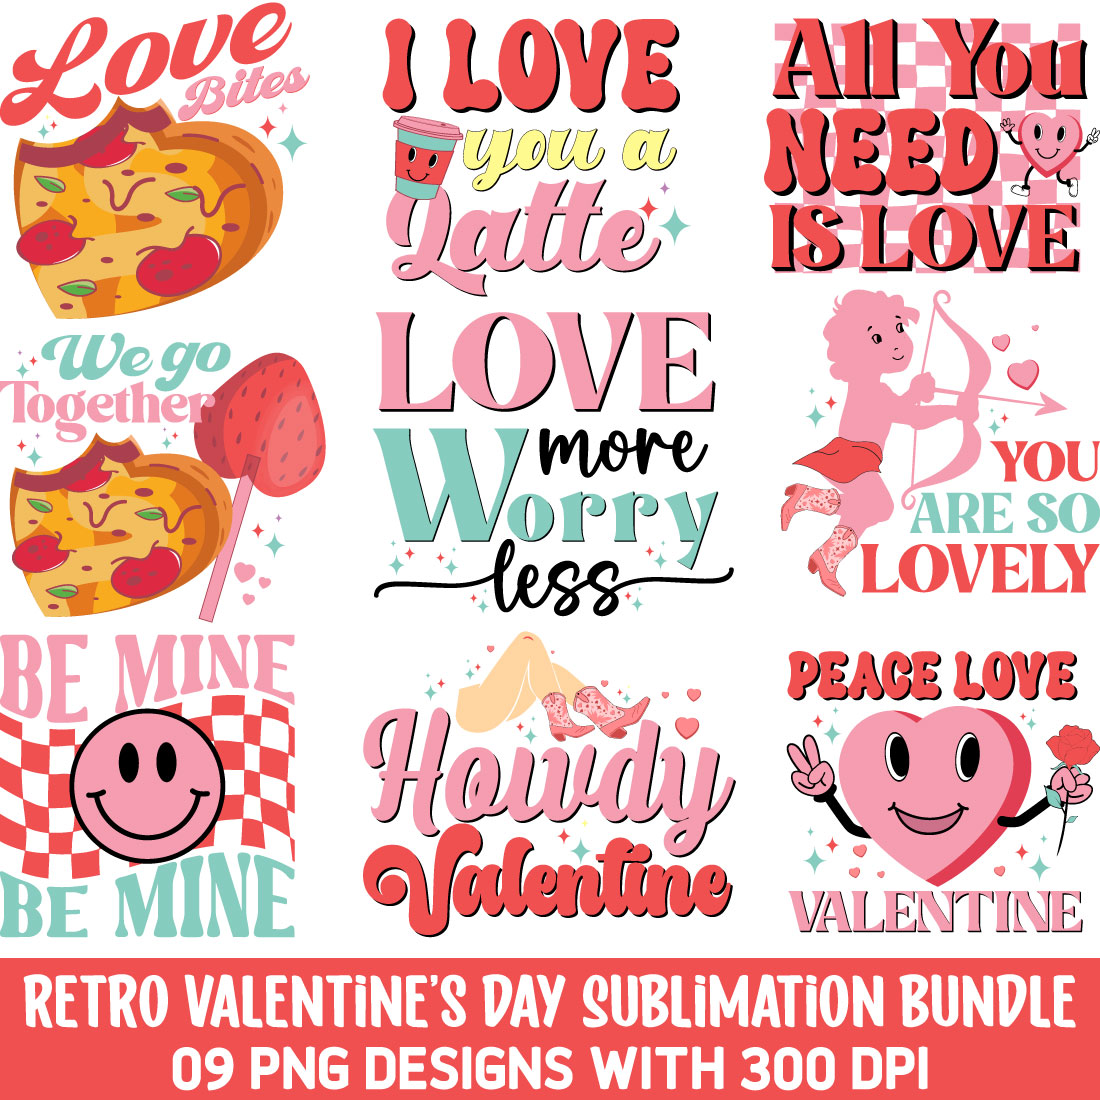 A collection of gorgeous images for a print on the theme of Valentines Day